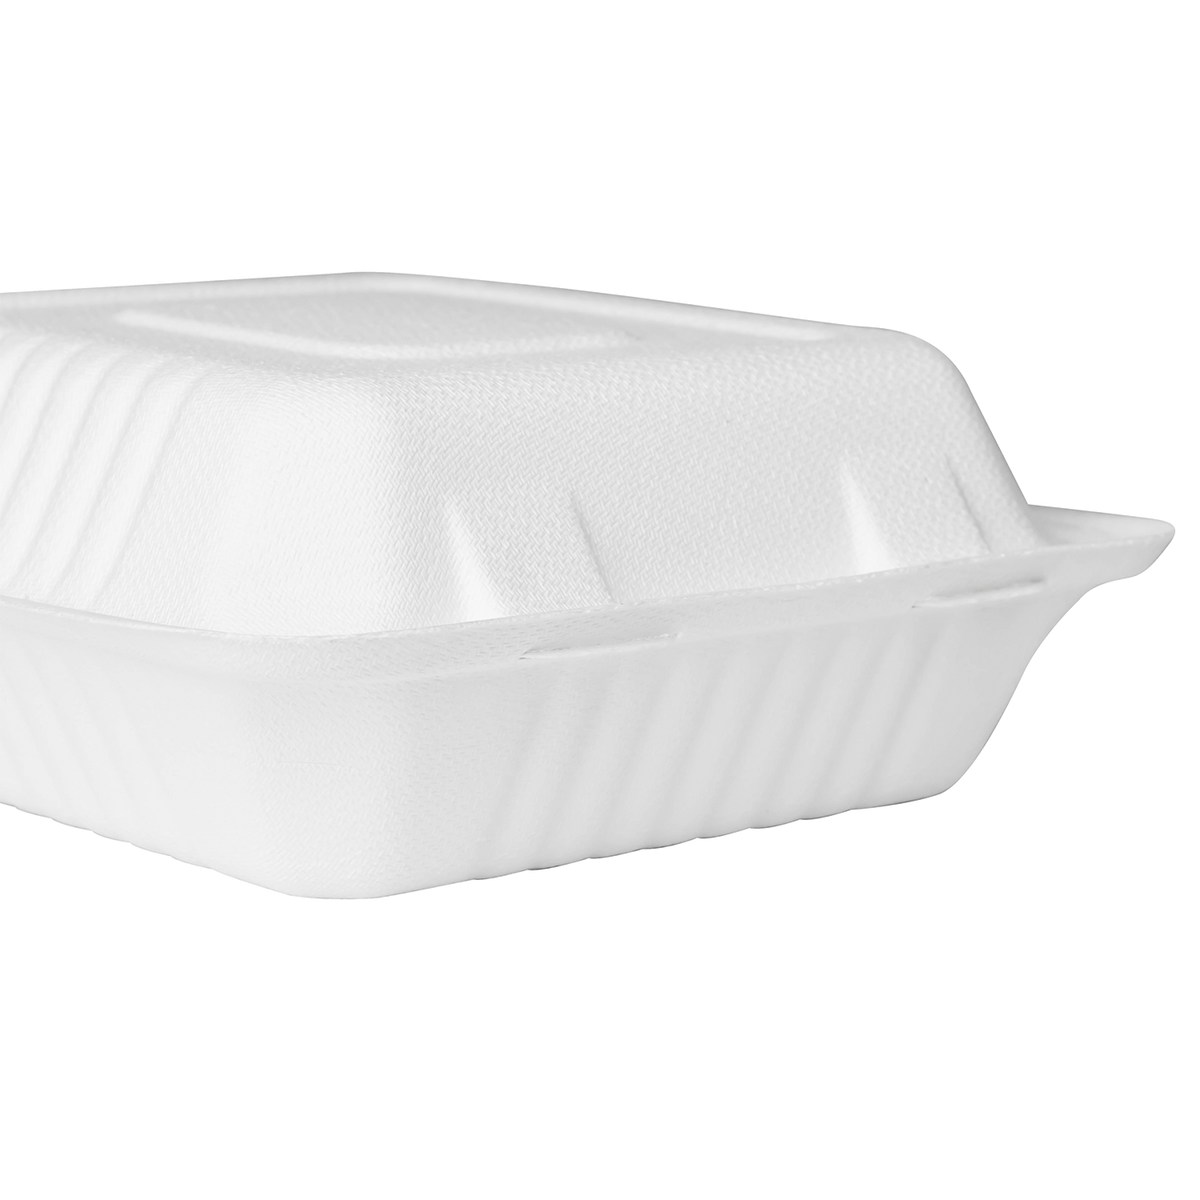 https://www.restaurantsupplydrops.shop/wp-content/uploads/1689/34/large-compostable-food-containers-karat-earth-8x8-compostable-bagasse-hinged-containers-200-ct-karat-discover-the-world-of-possibilities-take-a-look-at-our-large-selection_5.png